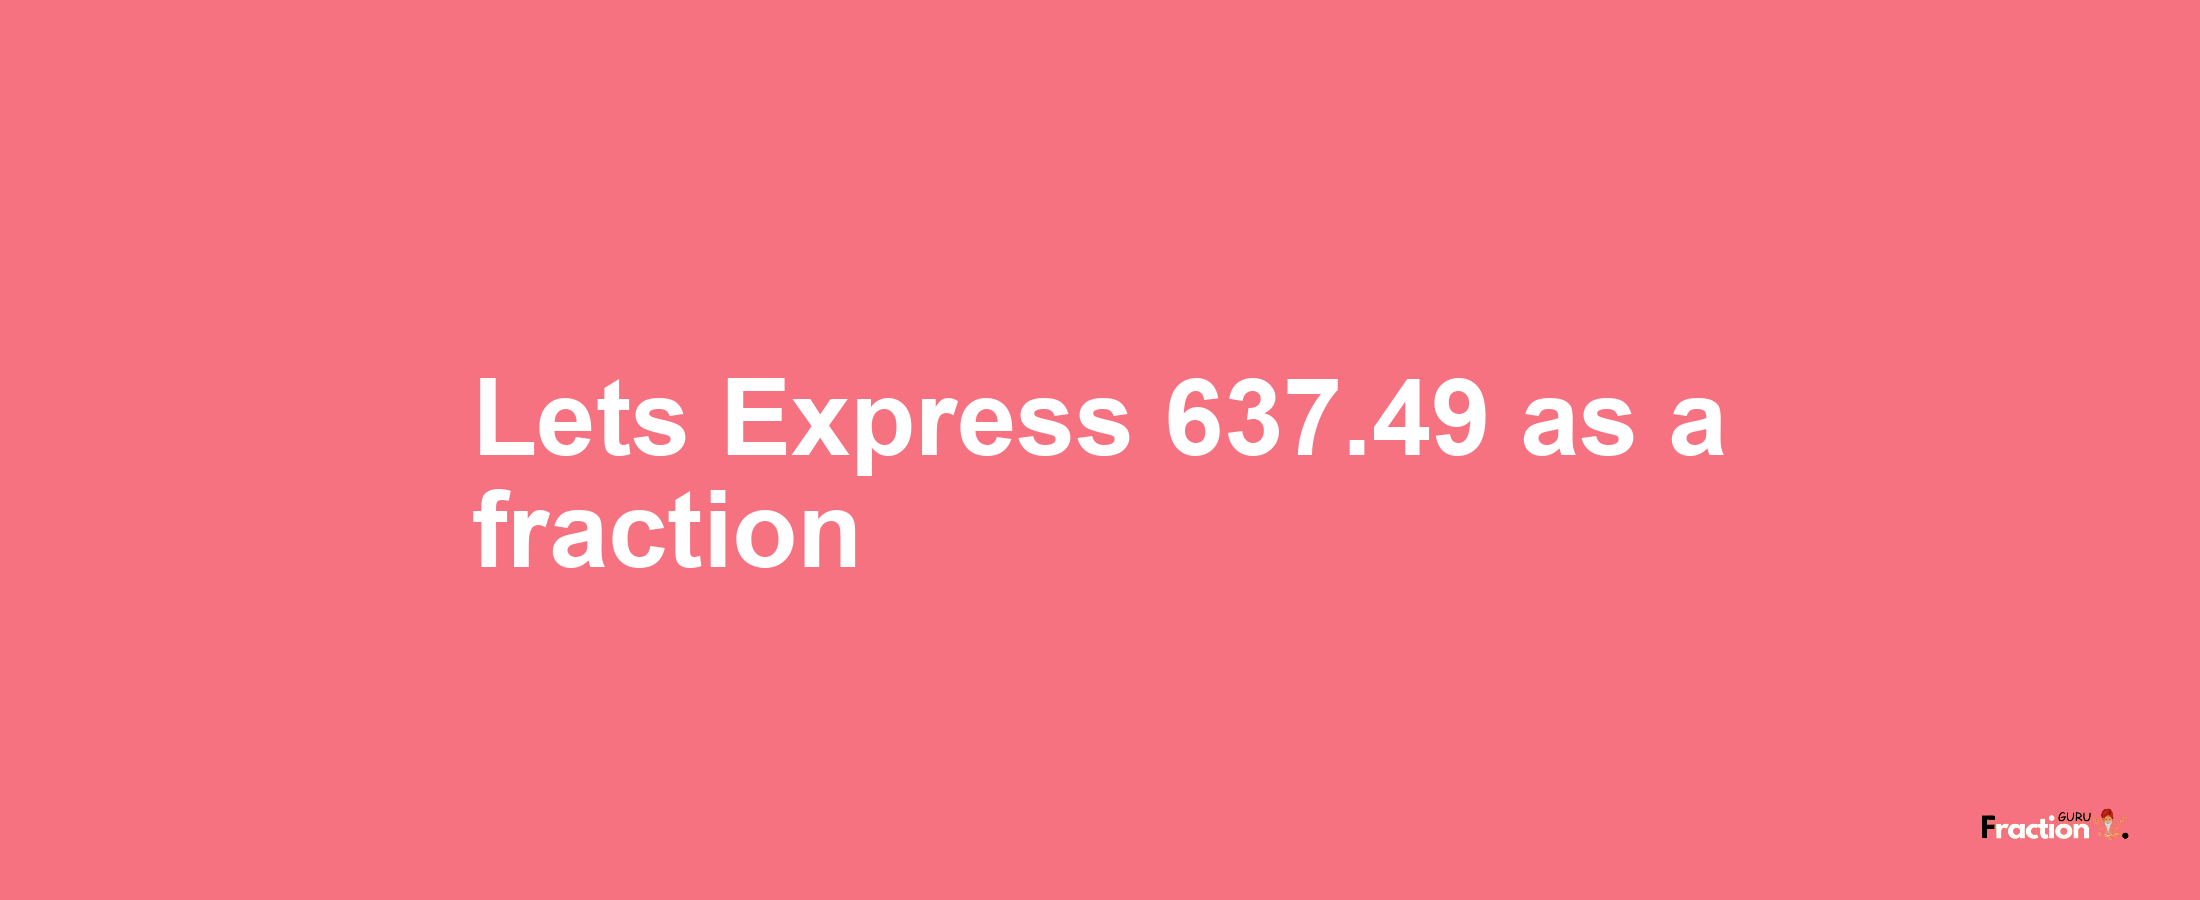 Lets Express 637.49 as afraction